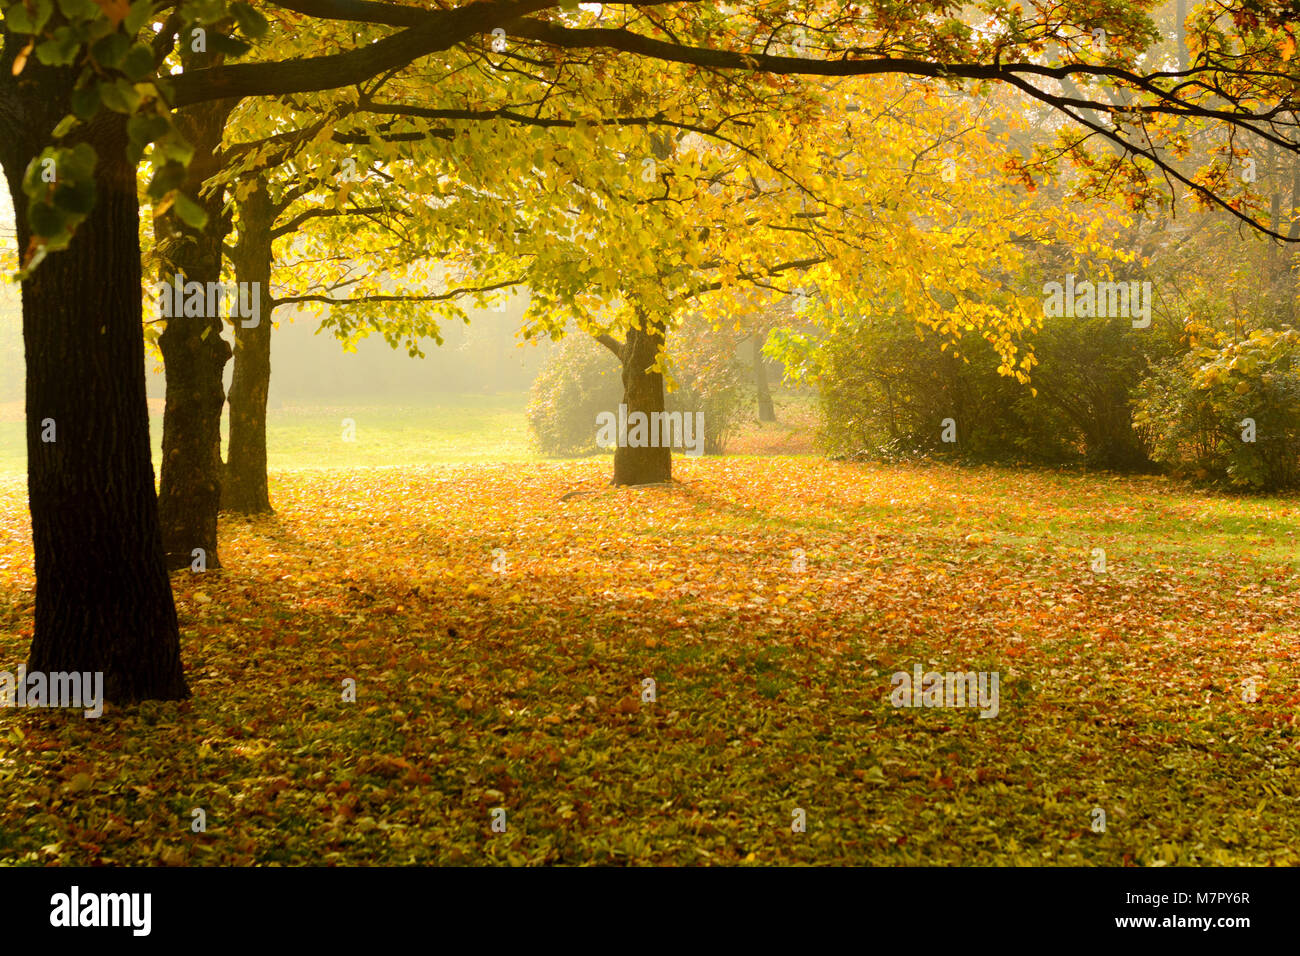 Yellow trees and orange foliage in park in autumn Stock Photo